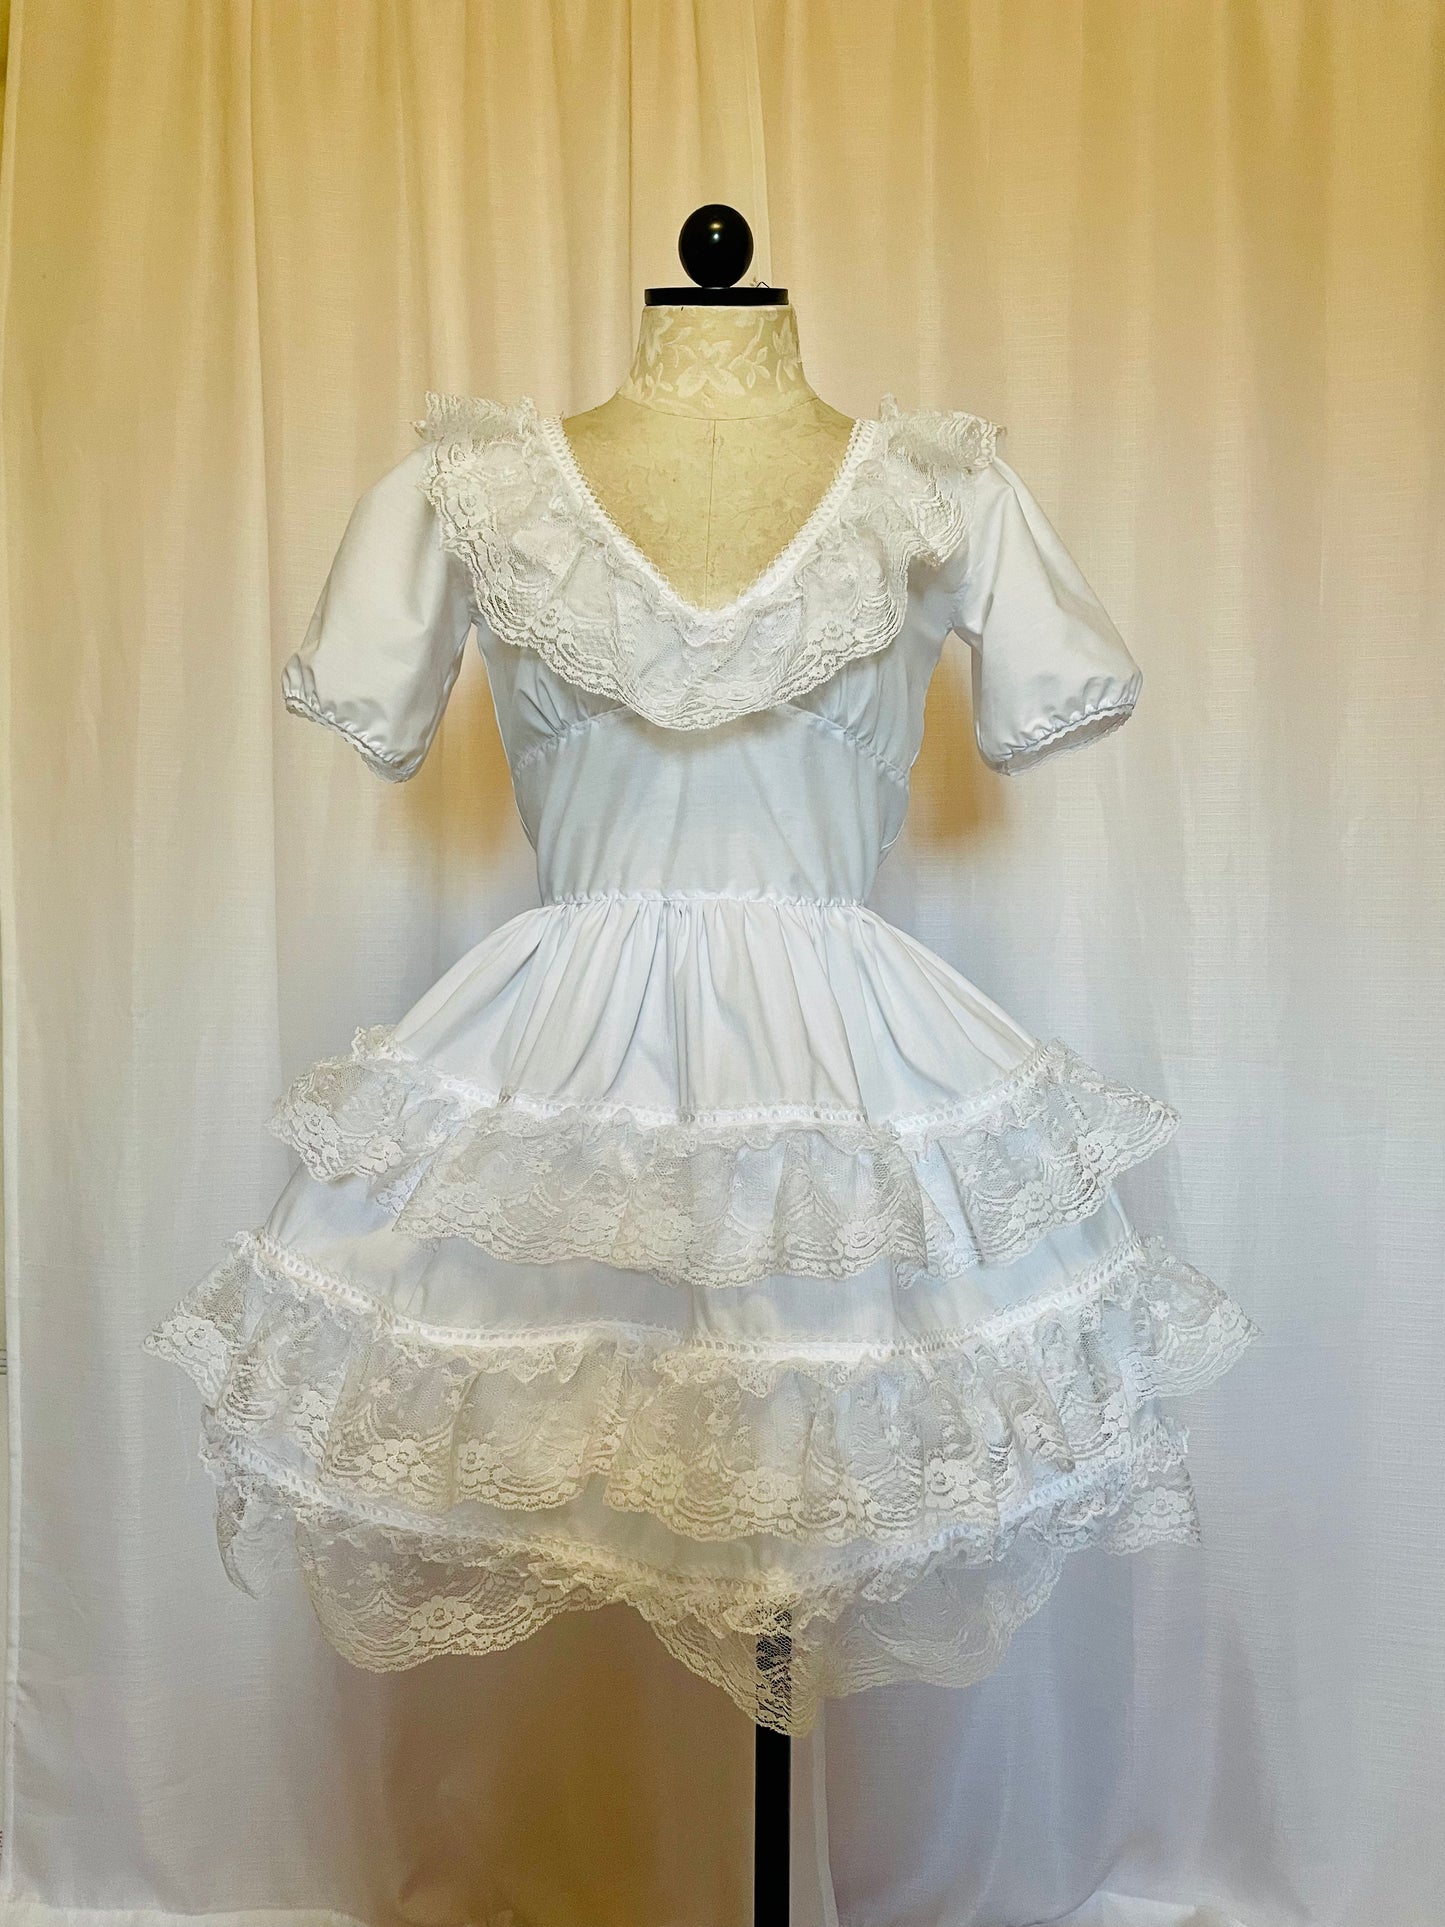 The Cupcake Dress in White